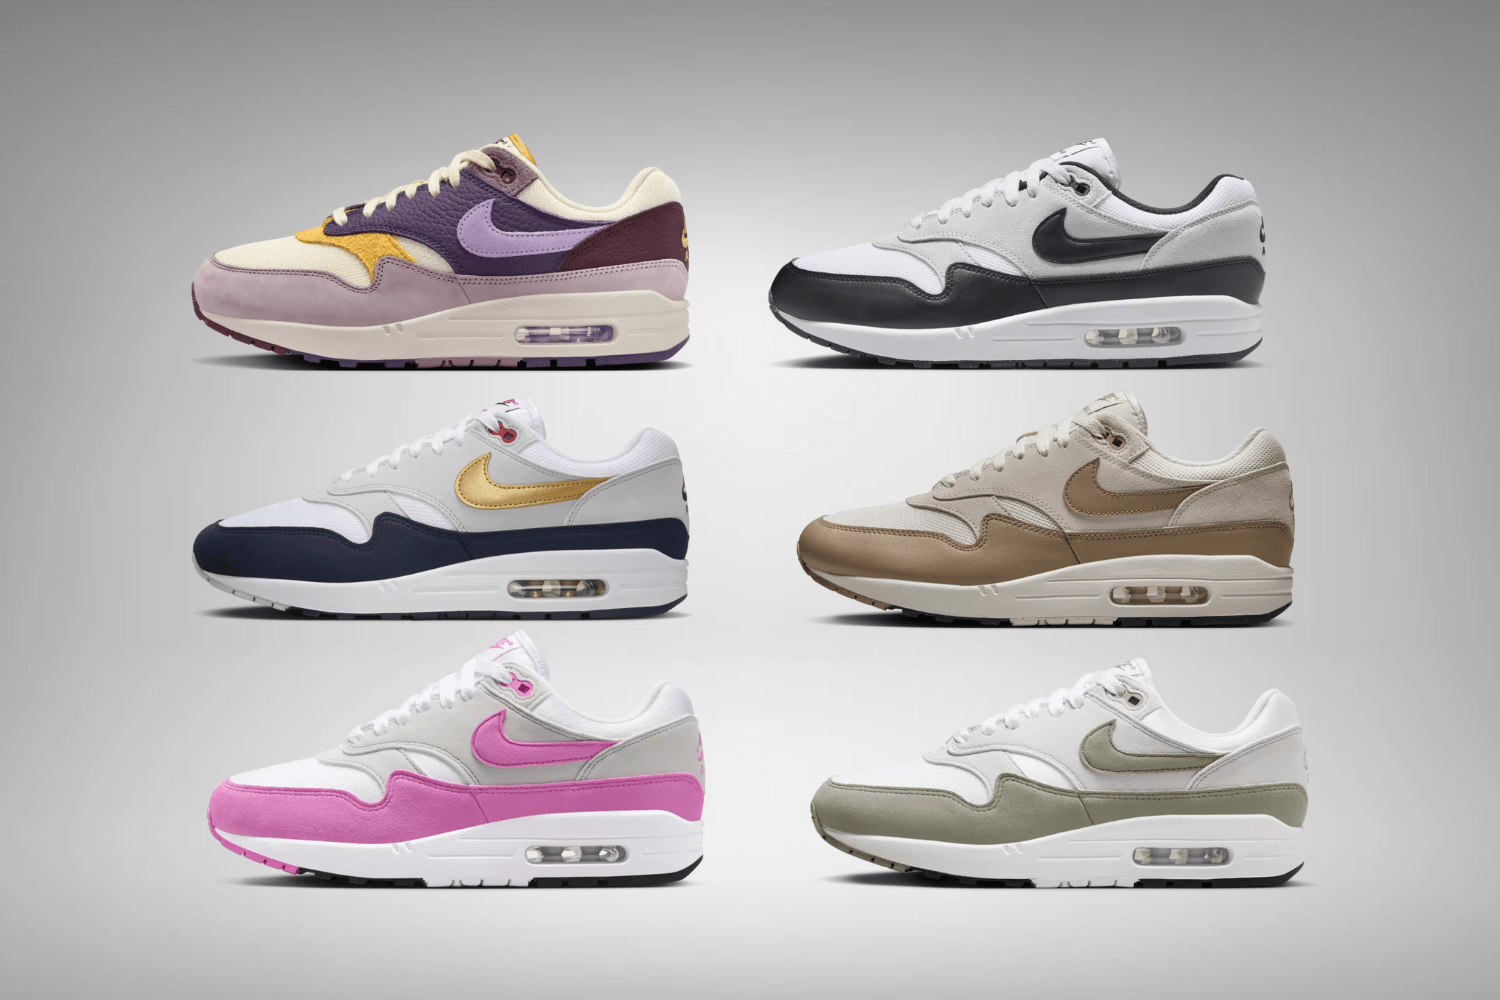 These Nike Air Max 1 releases are expected in 2024